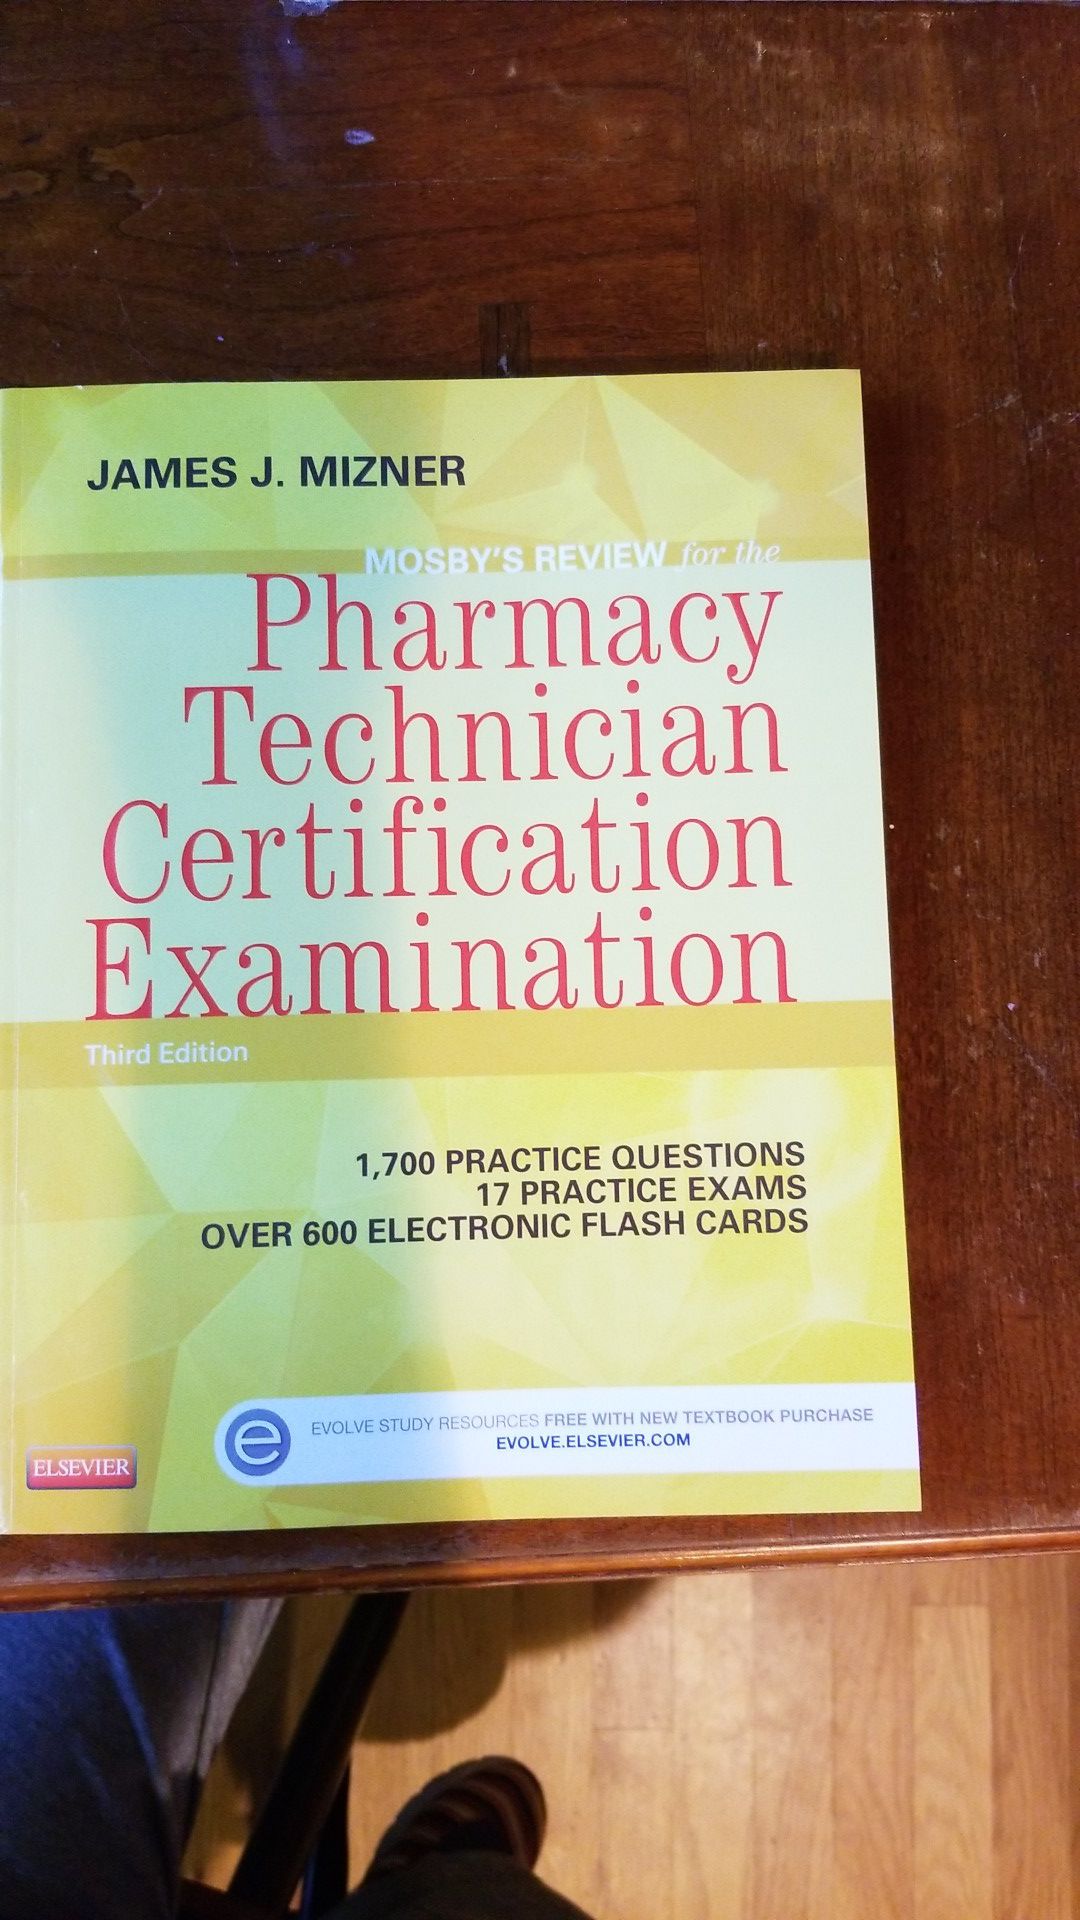 Pharmacy Technician Certification Exam Review study guide